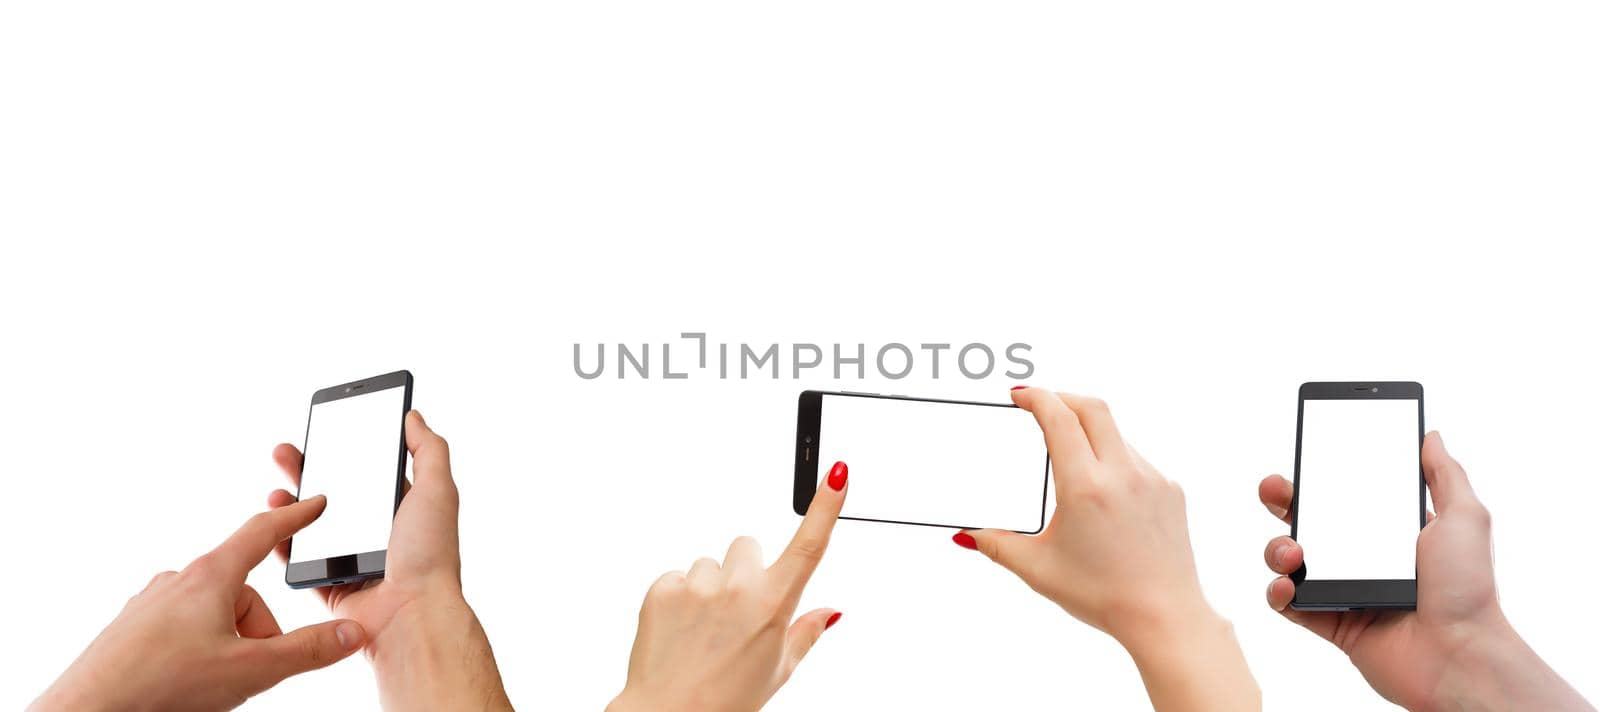 Isolated hands holding the smartphone in different ways.